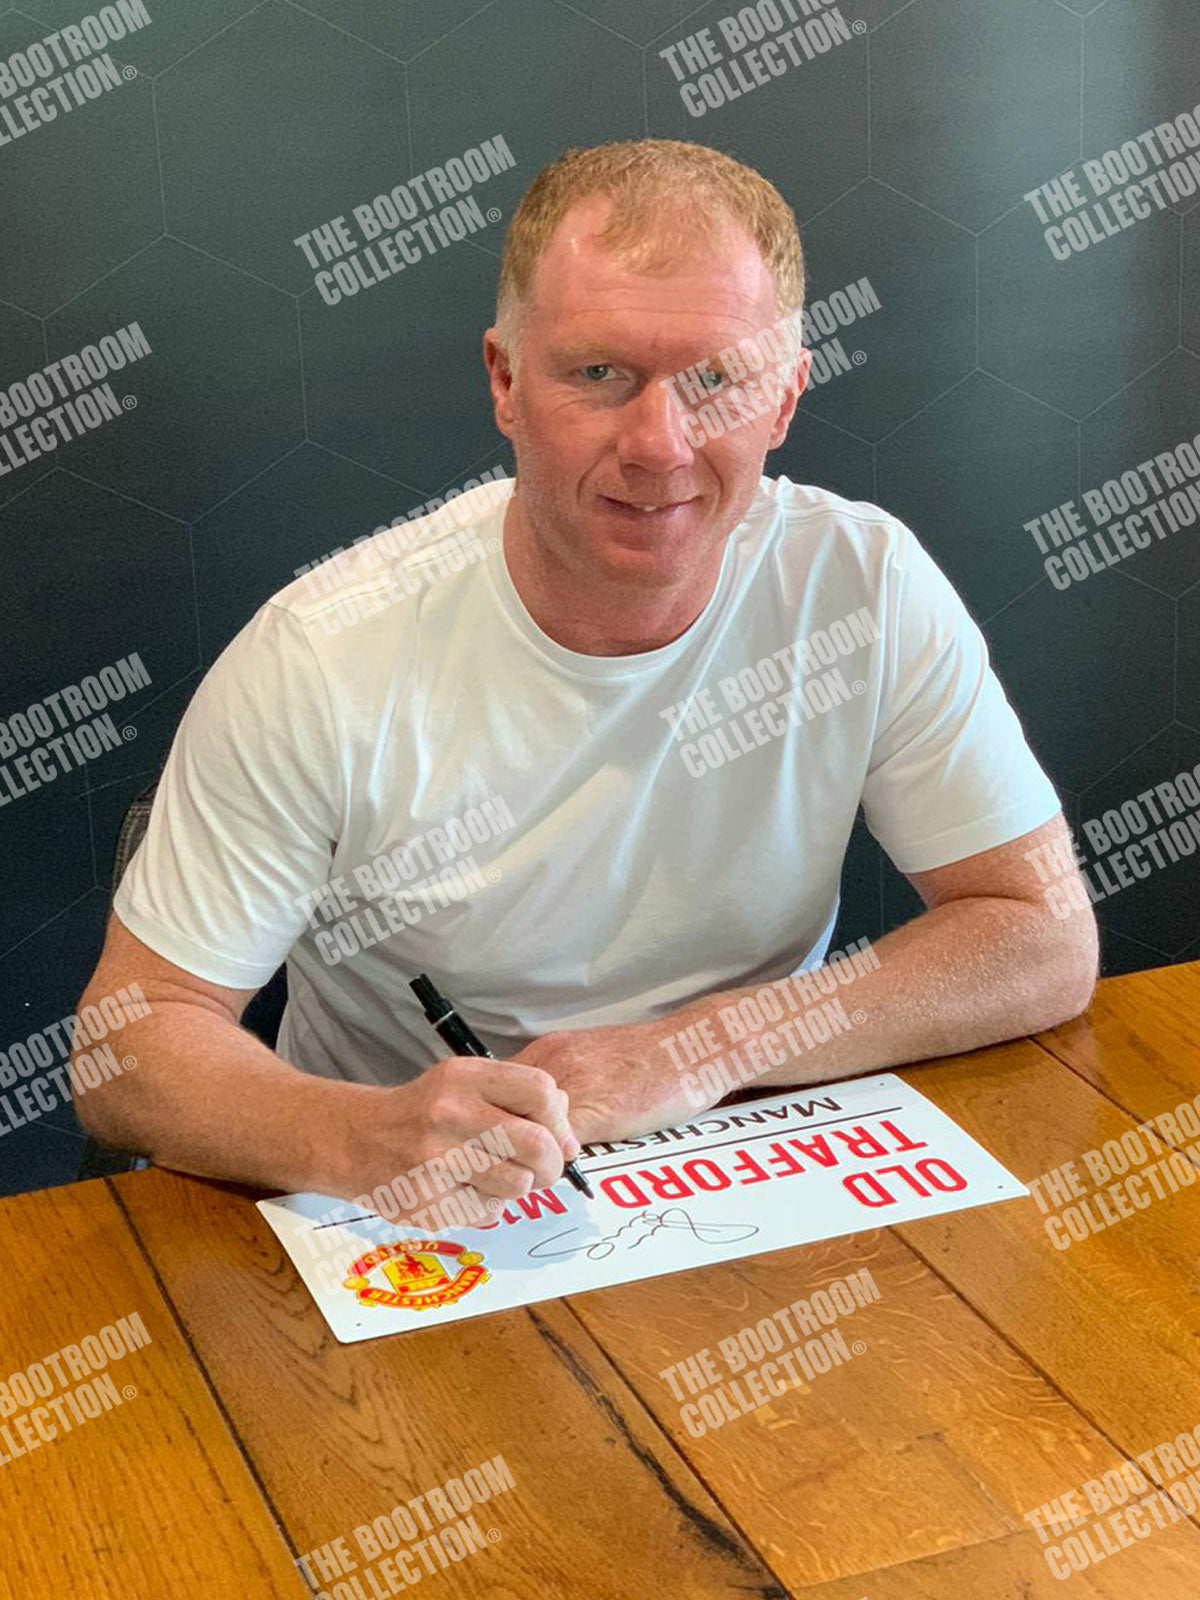 Paul Scholes Signed Manchester United Street Sign - The Bootroom Collection